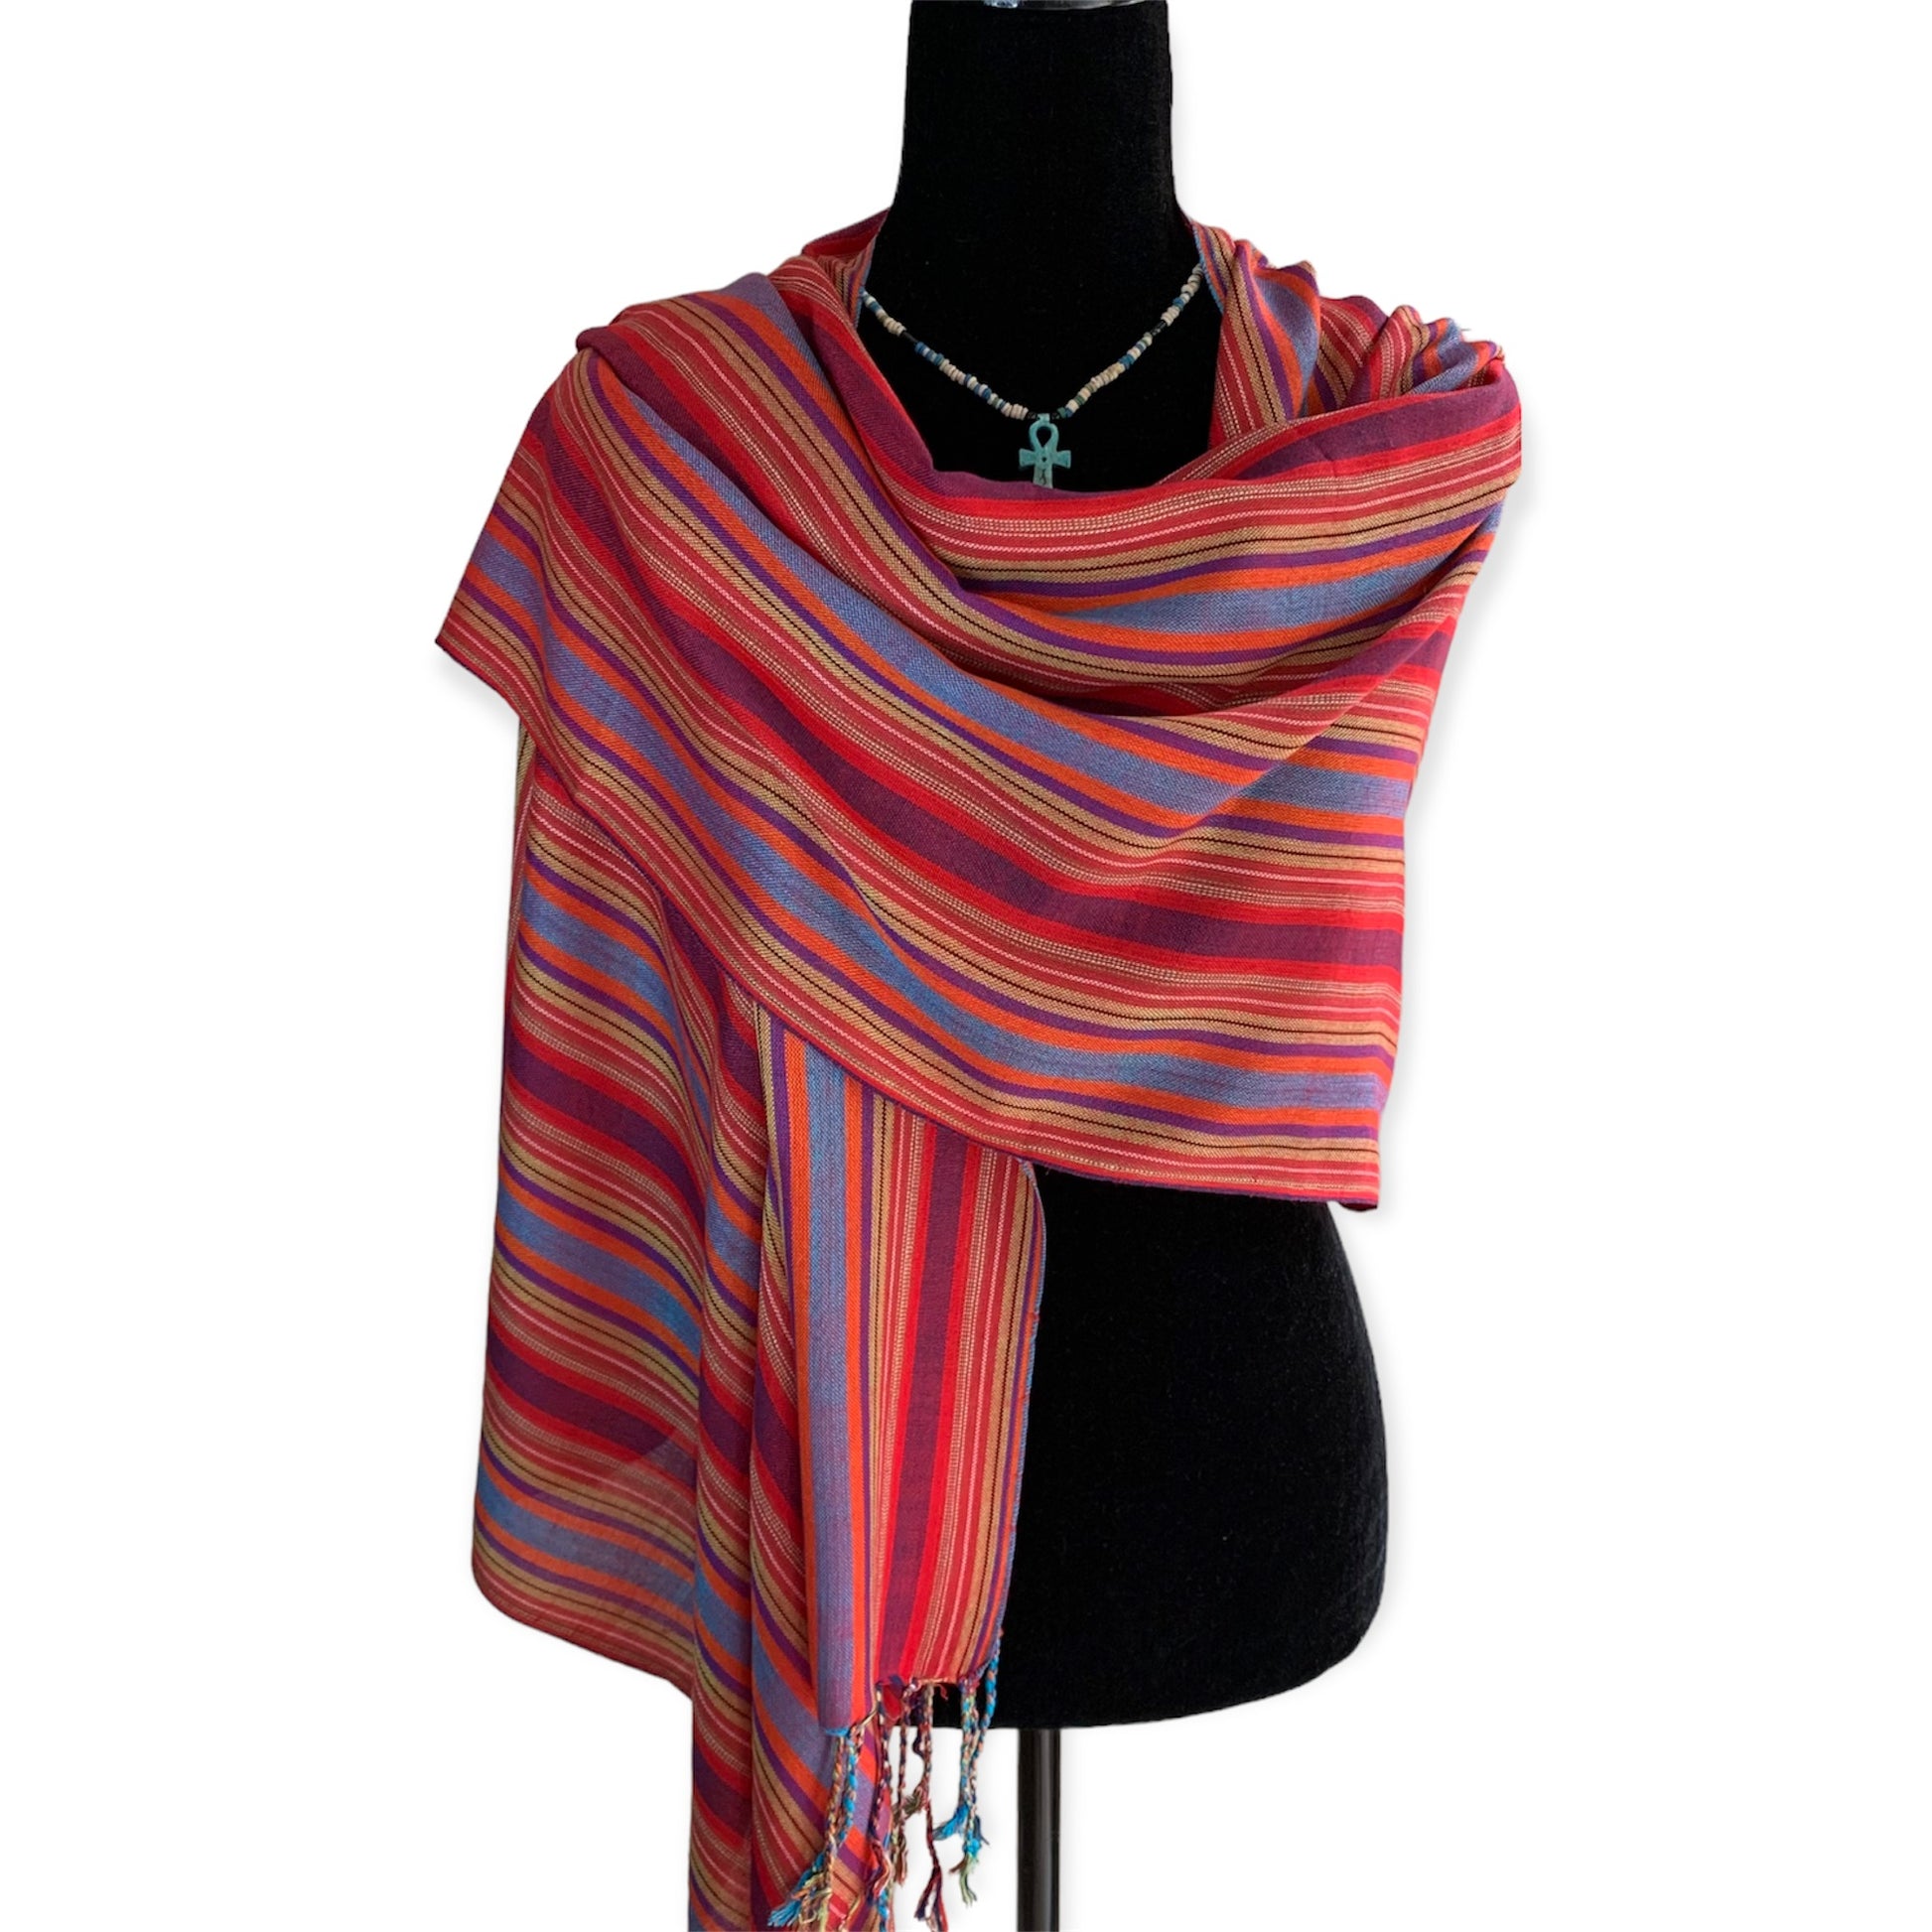 Mixed Striped Handwoven Bamboo Viscose Scarf - Red, Mustard & Mauve